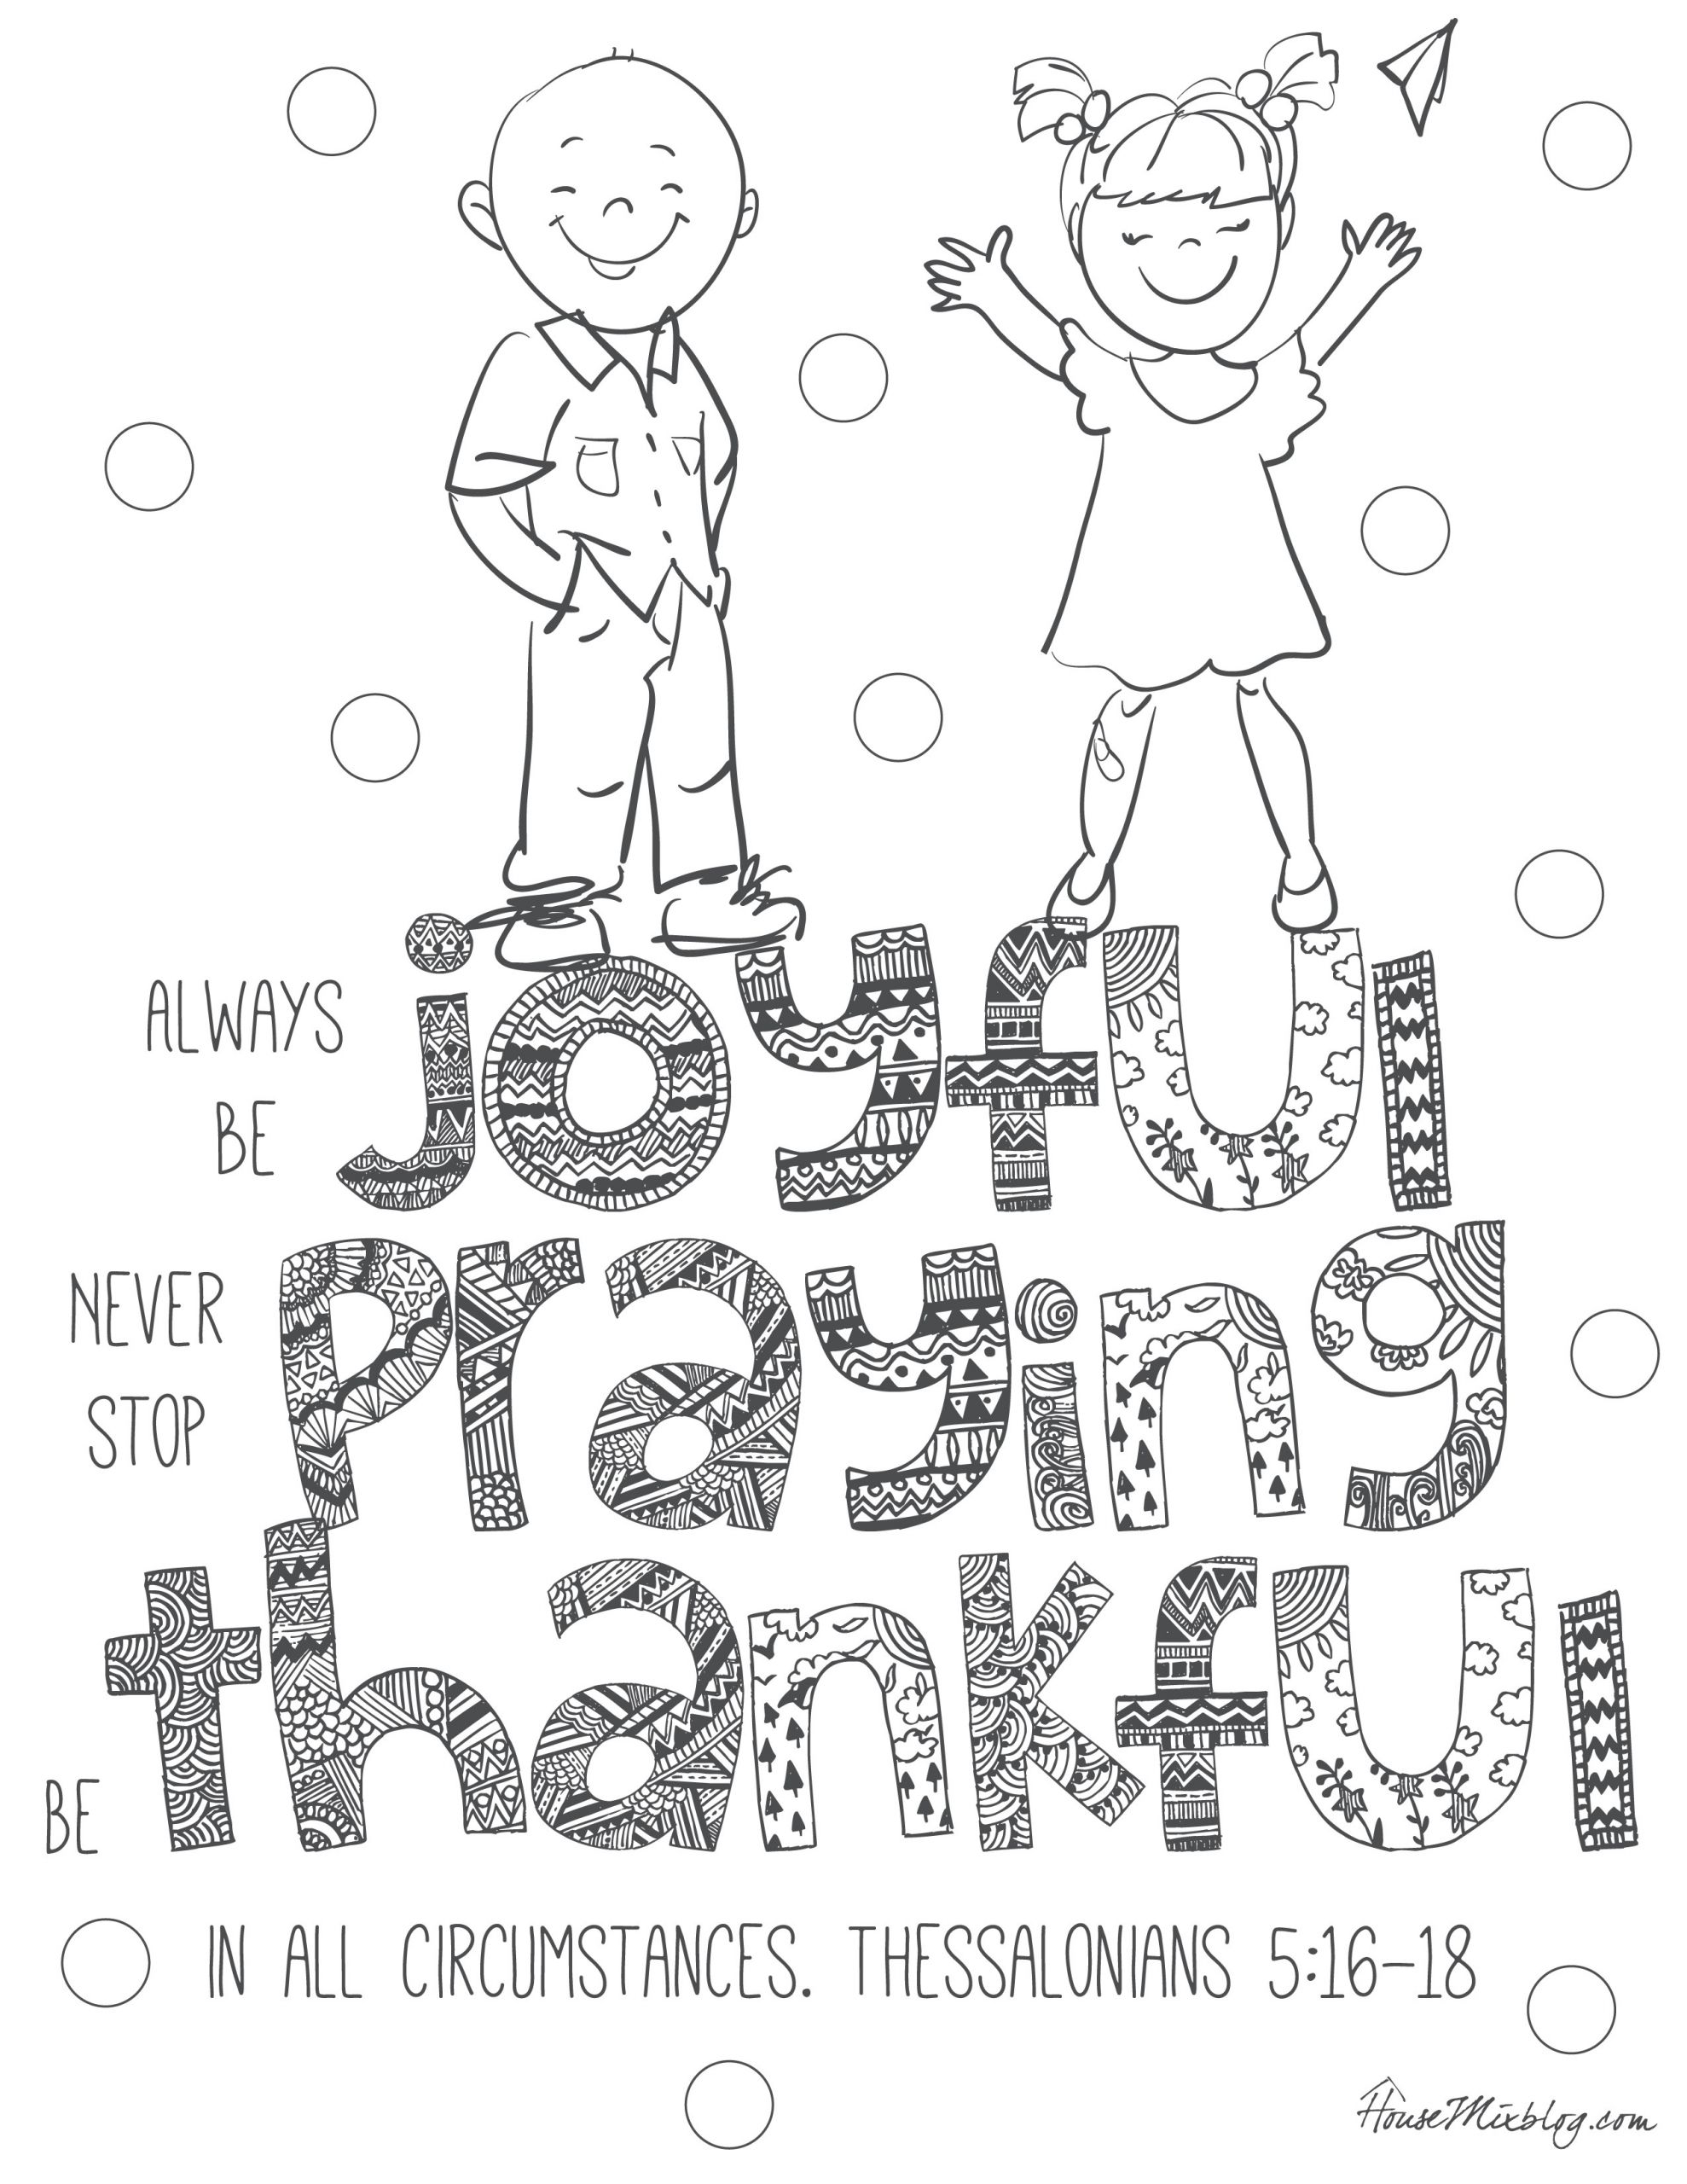 Printable Bible Verse Coloring Pages
 11 Bible verses to teach kids with printables to color